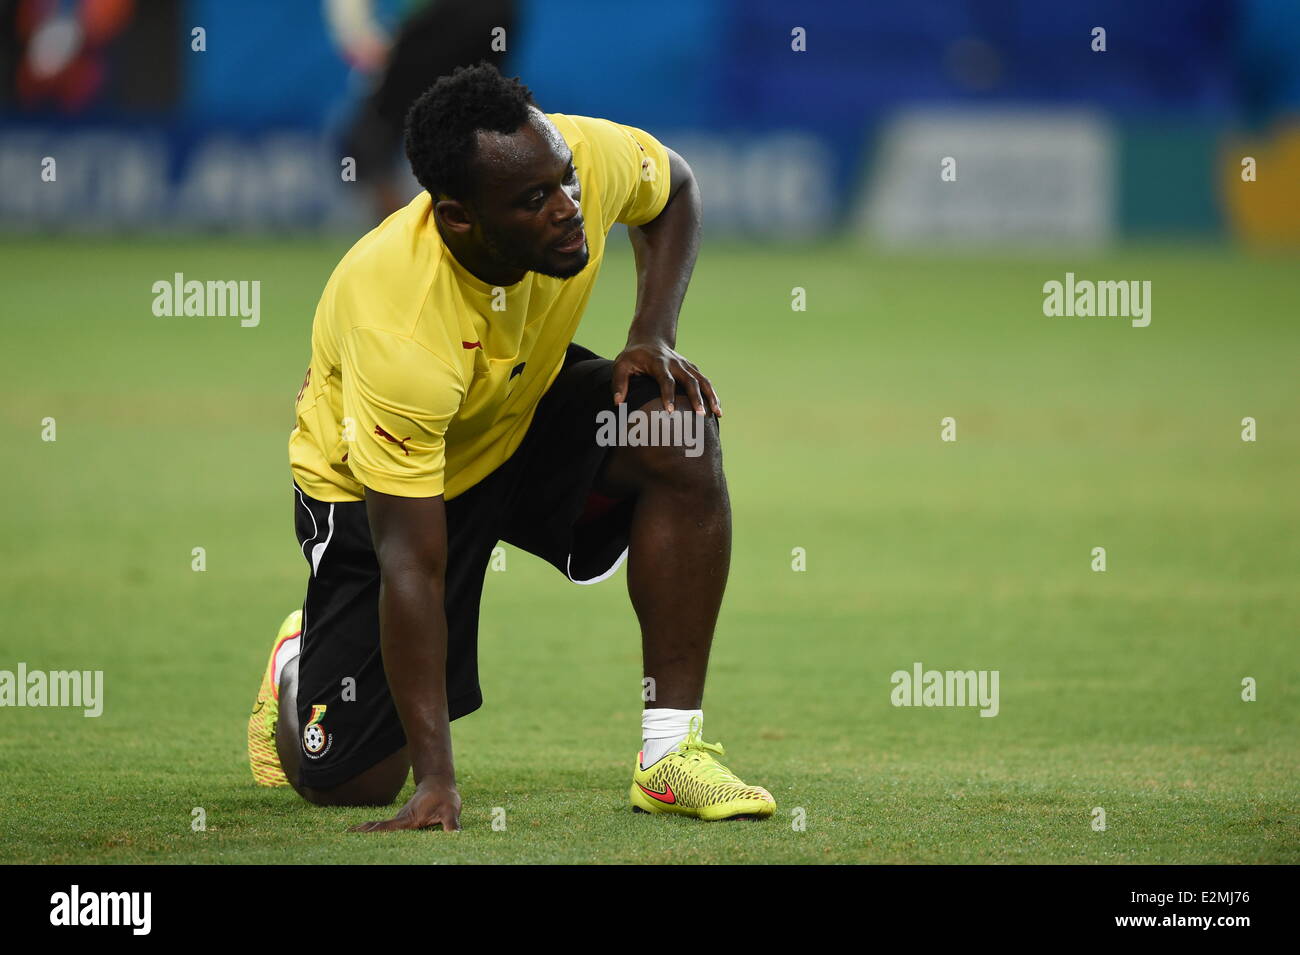 Fortaleza, Brazil. 20th June, 2014. Michael Essien of Ghana during a training session at the Estadio Castelao in Fortaleza, Brazil, 20 June 2014. The FIFA World Cup will take place in Brazil from 12 June to 13 July 2014. Photo: Marcus Brandt/dpa/Alamy Live News Stock Photo